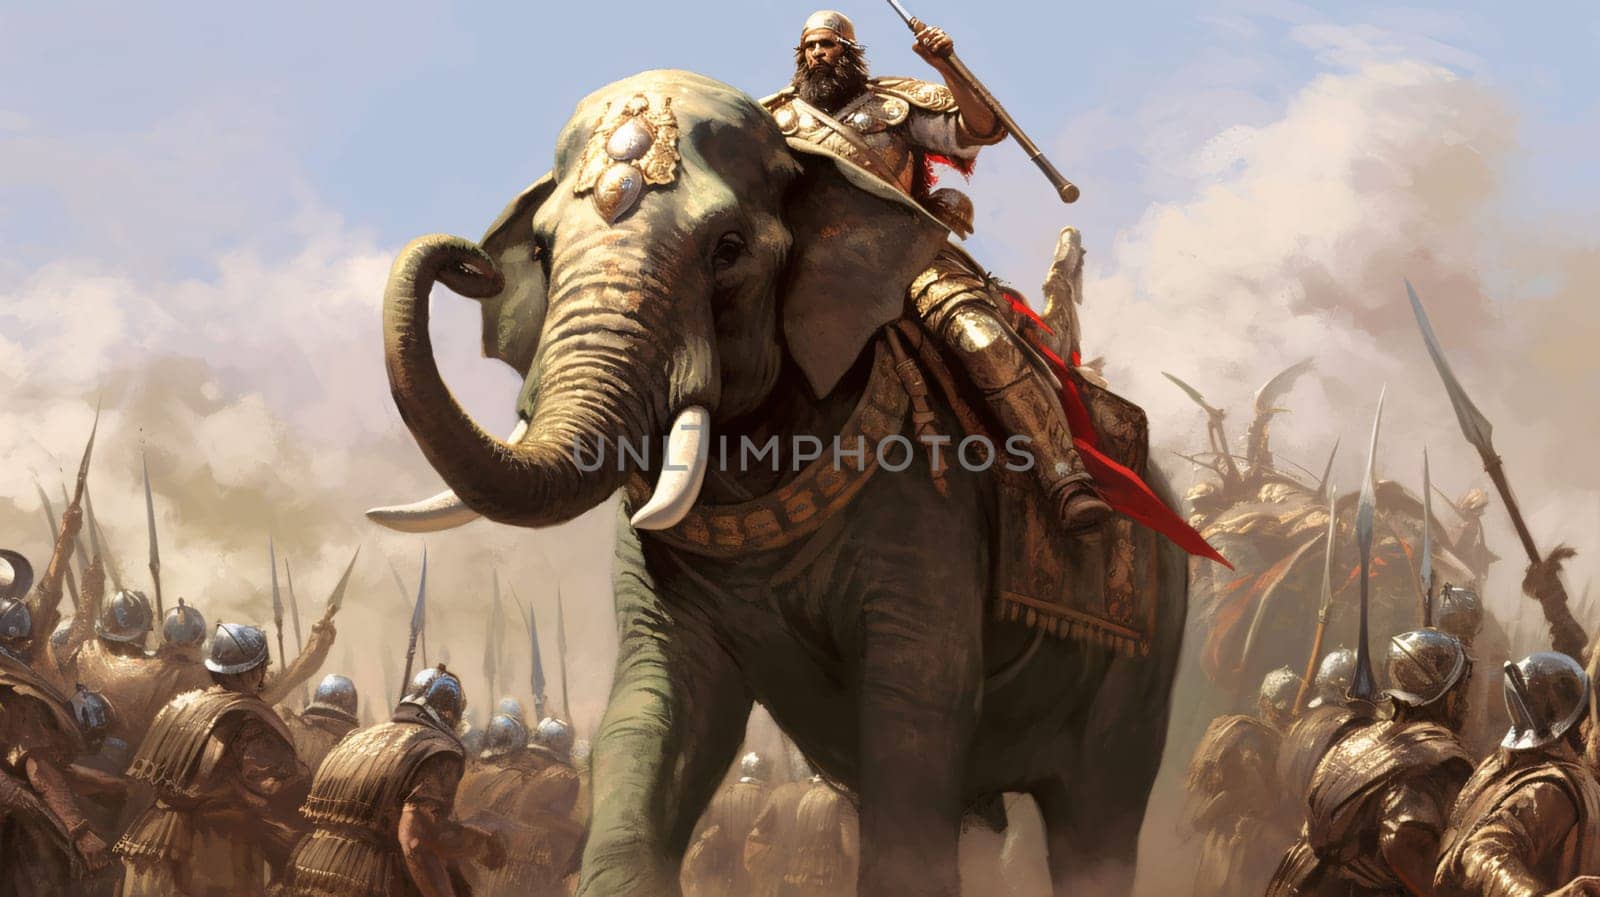 elephant in the armor of the medieval knight. 3d illustration by ThemesS